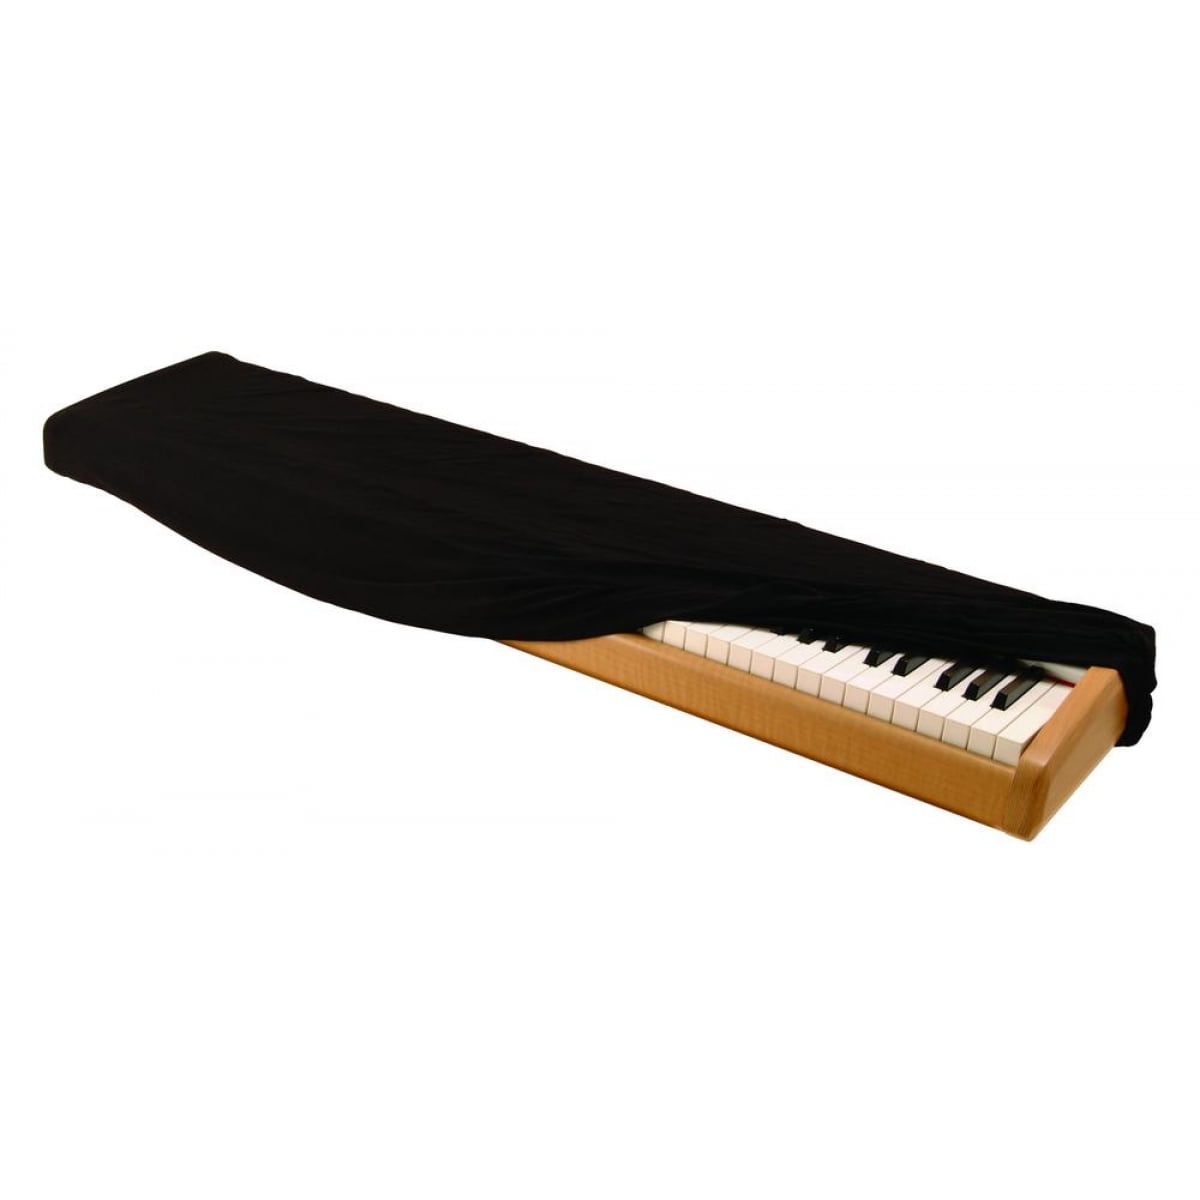 Roland Consoles and more 61-76 Keys Yamaha Casio Stretchable Dust Protector Cover for Electronic Keyboard Keyboard Accessories Piano Keyboard Dust Cover Digital Piano